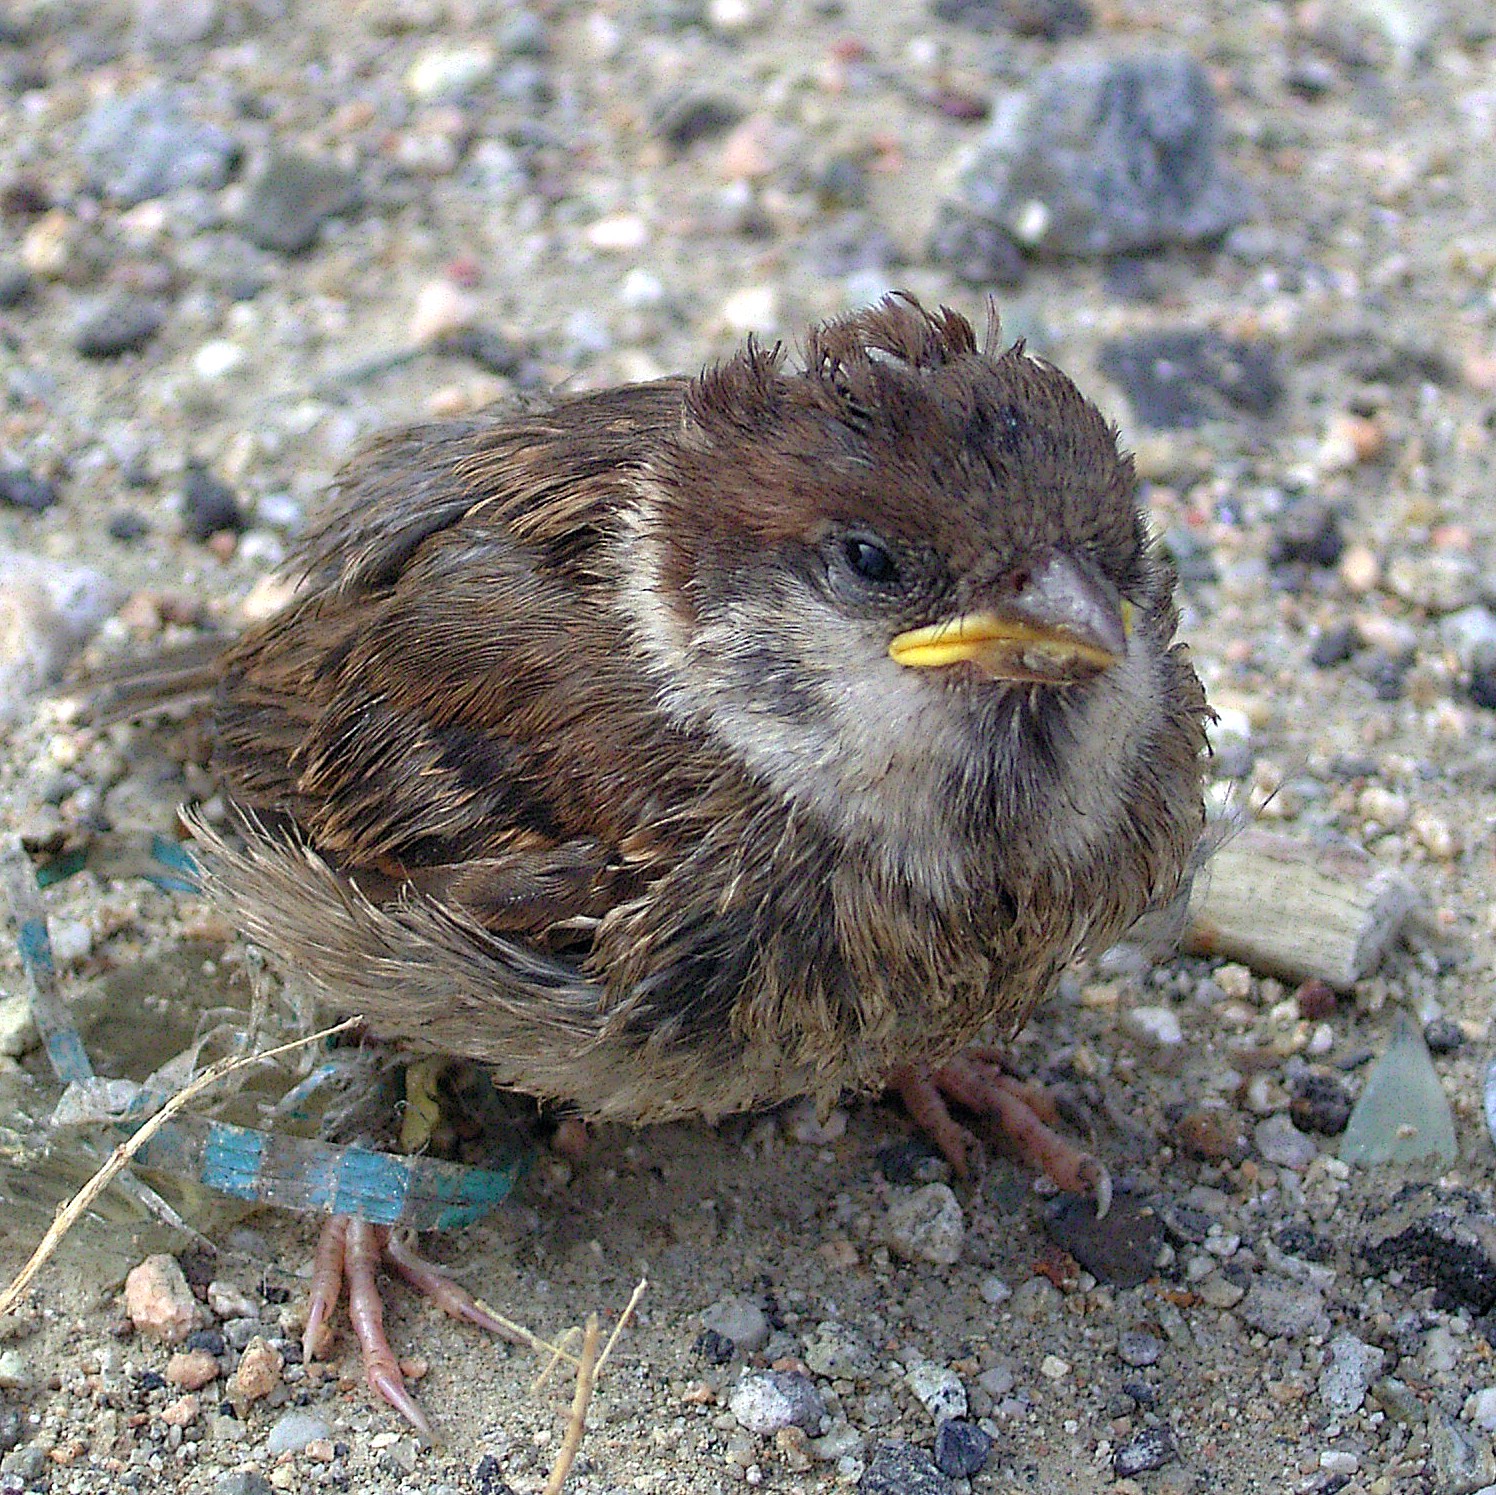 File:Sparrow chick (2).jpg - Wikimedia Commons